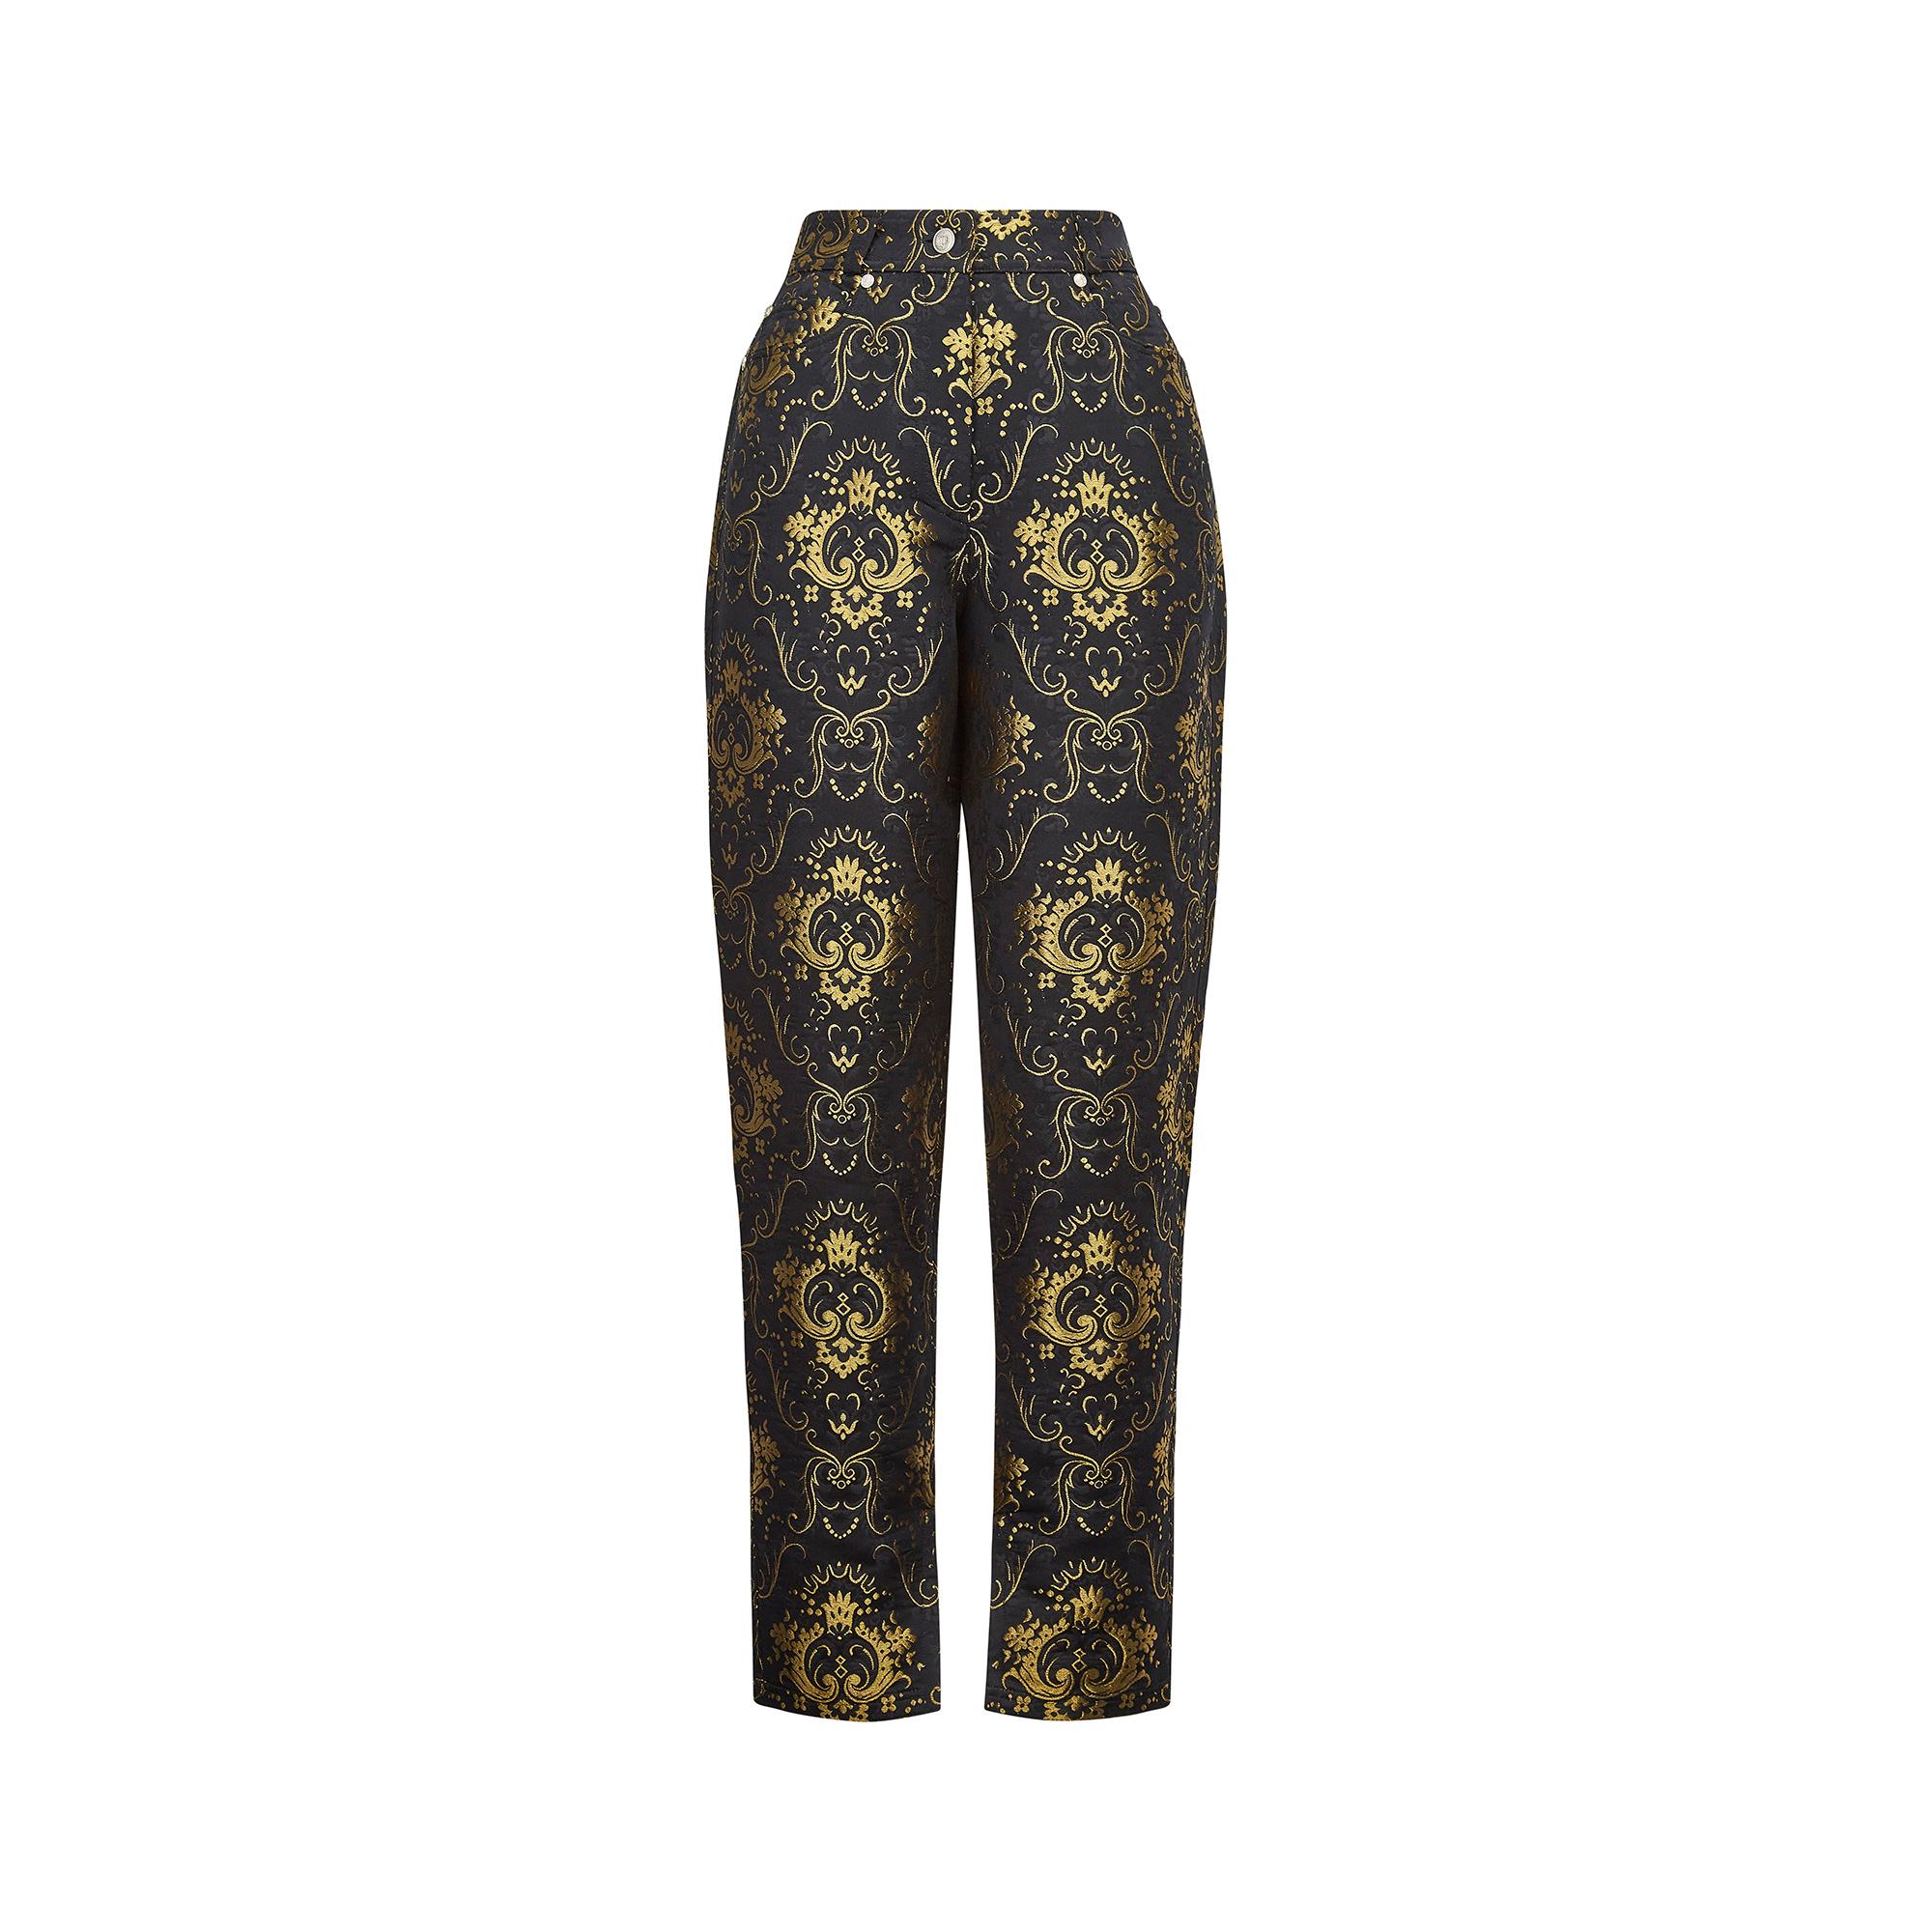 Superb 1990s Gianni Versace high rise and tapered trouser jeans designed when Gianni himself was at the creative helm. From his high-end couture collection, these date to 1995 and are in a black and gold metallic silk blend brocade featuring the